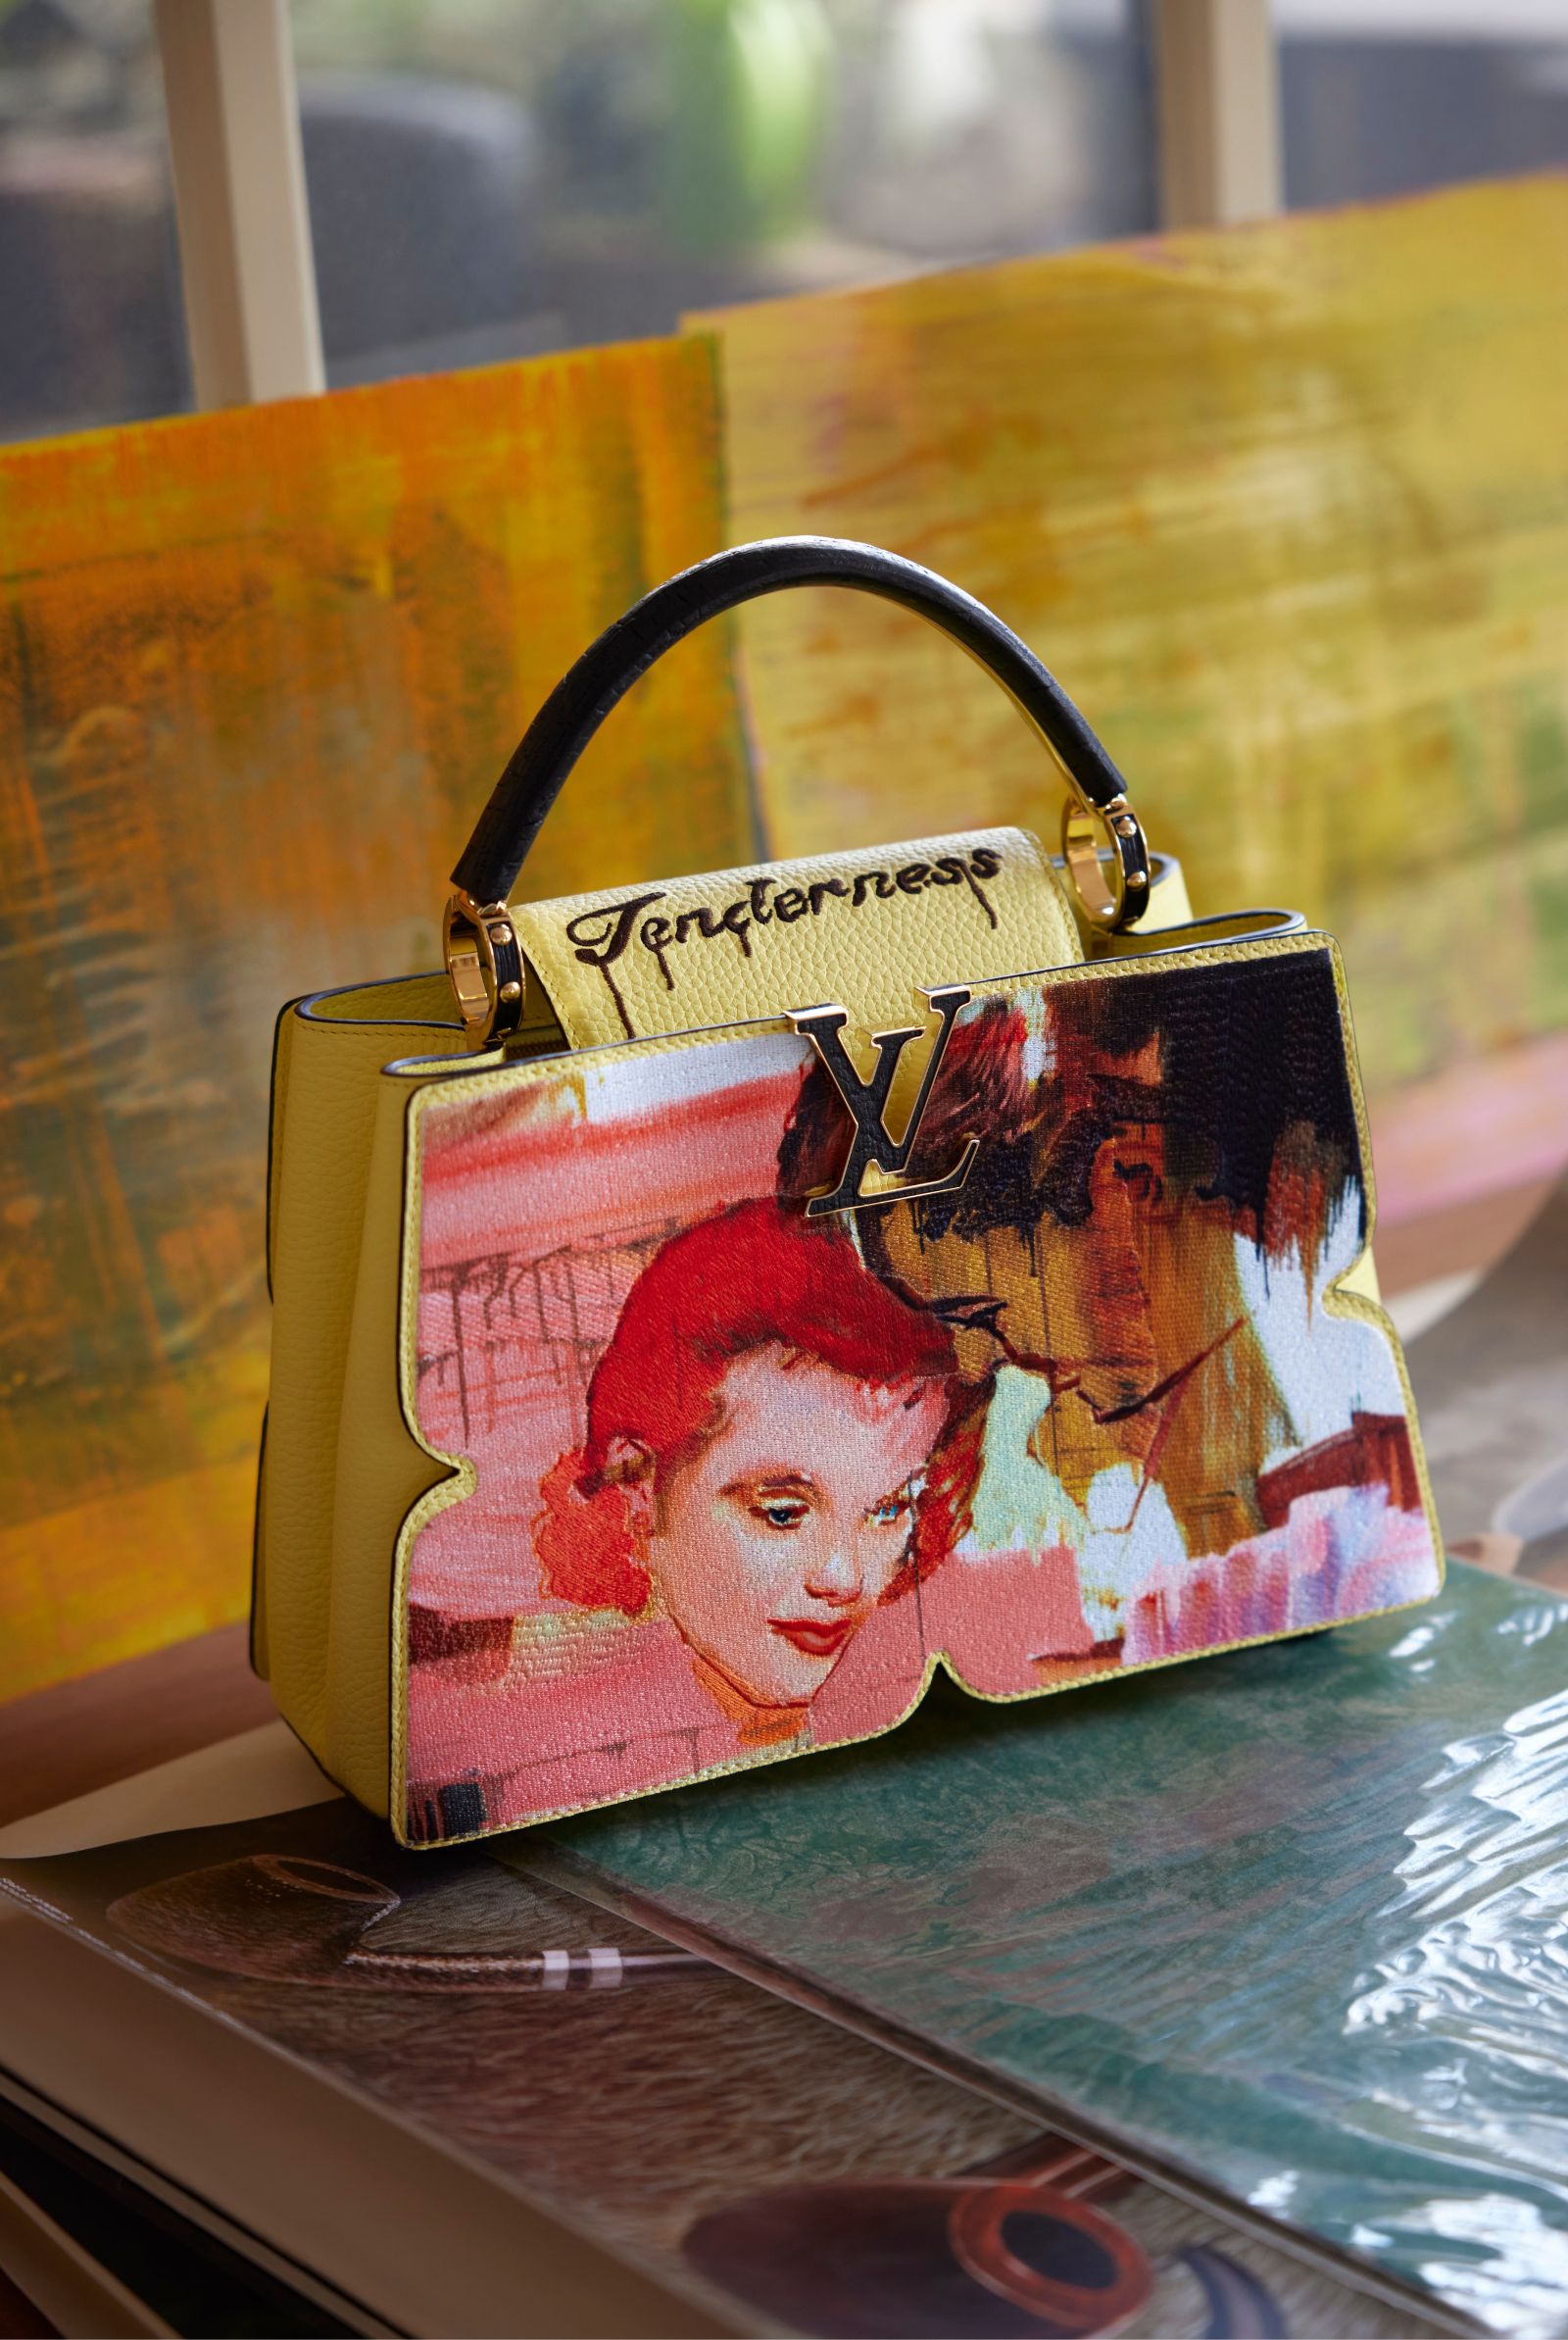 Get Ready for Louis Vuitton'sNew Artycapucines Collection